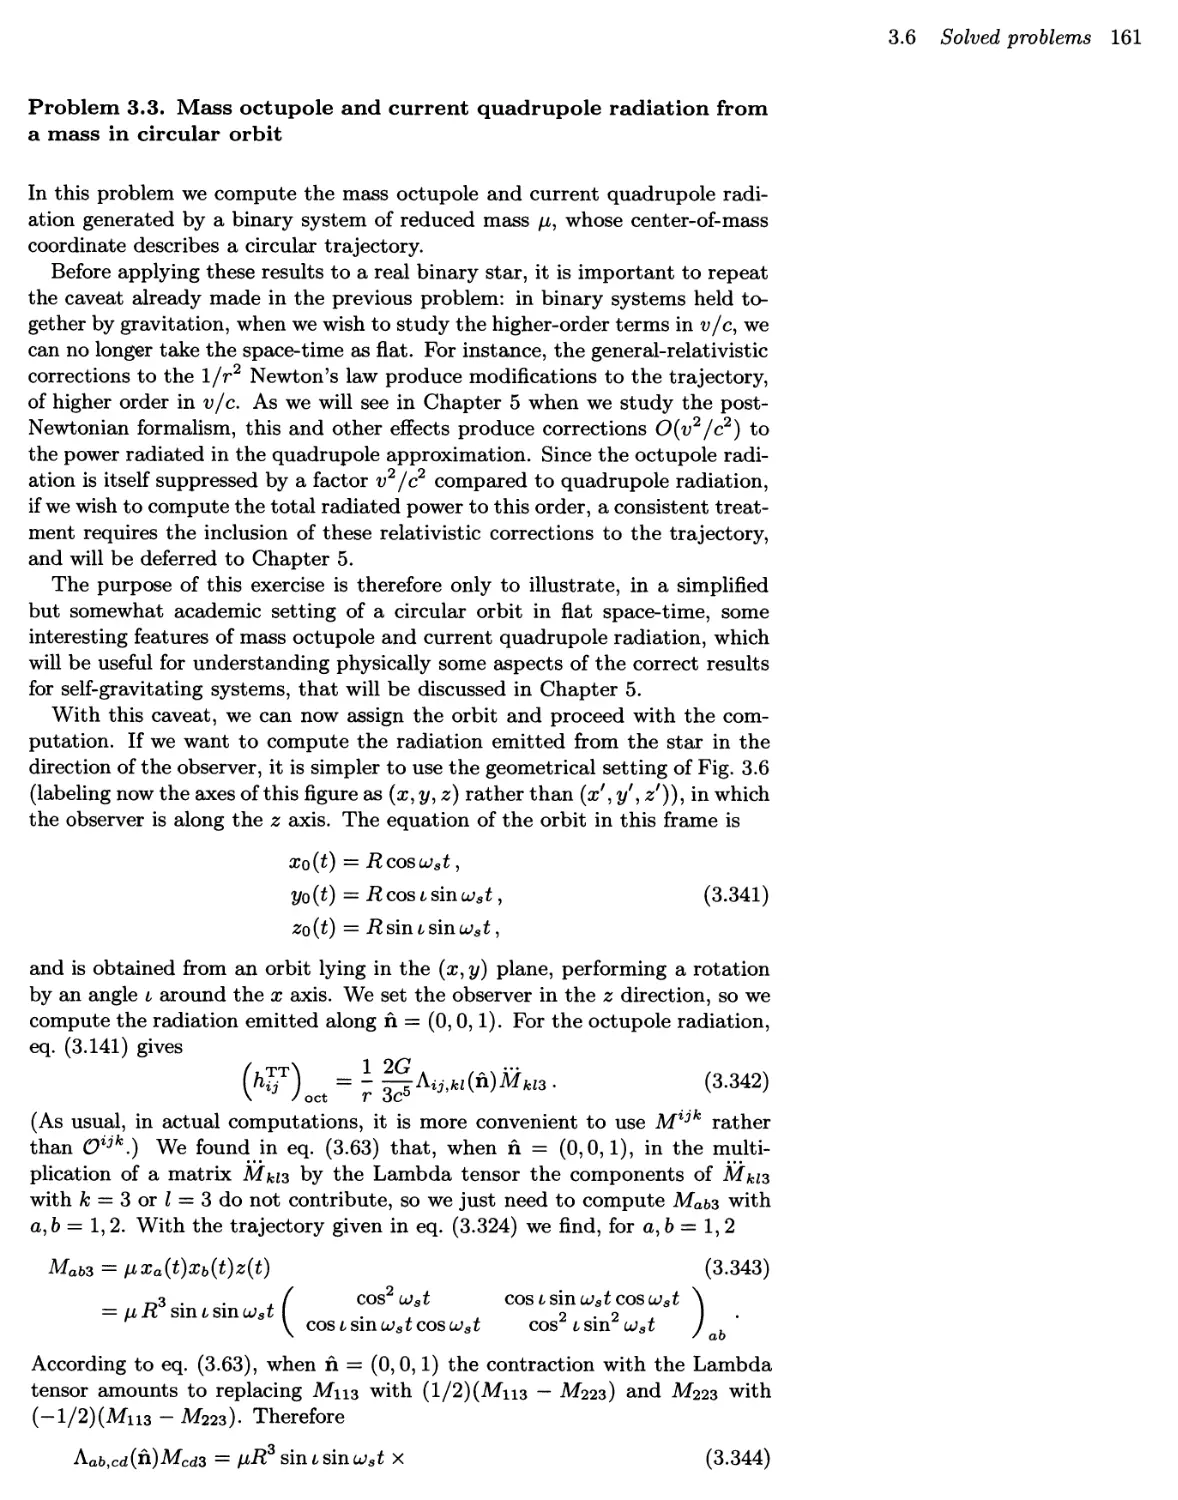 3.3. Mass octupole and current quadrupole radiation from a mass in circular orbit 161